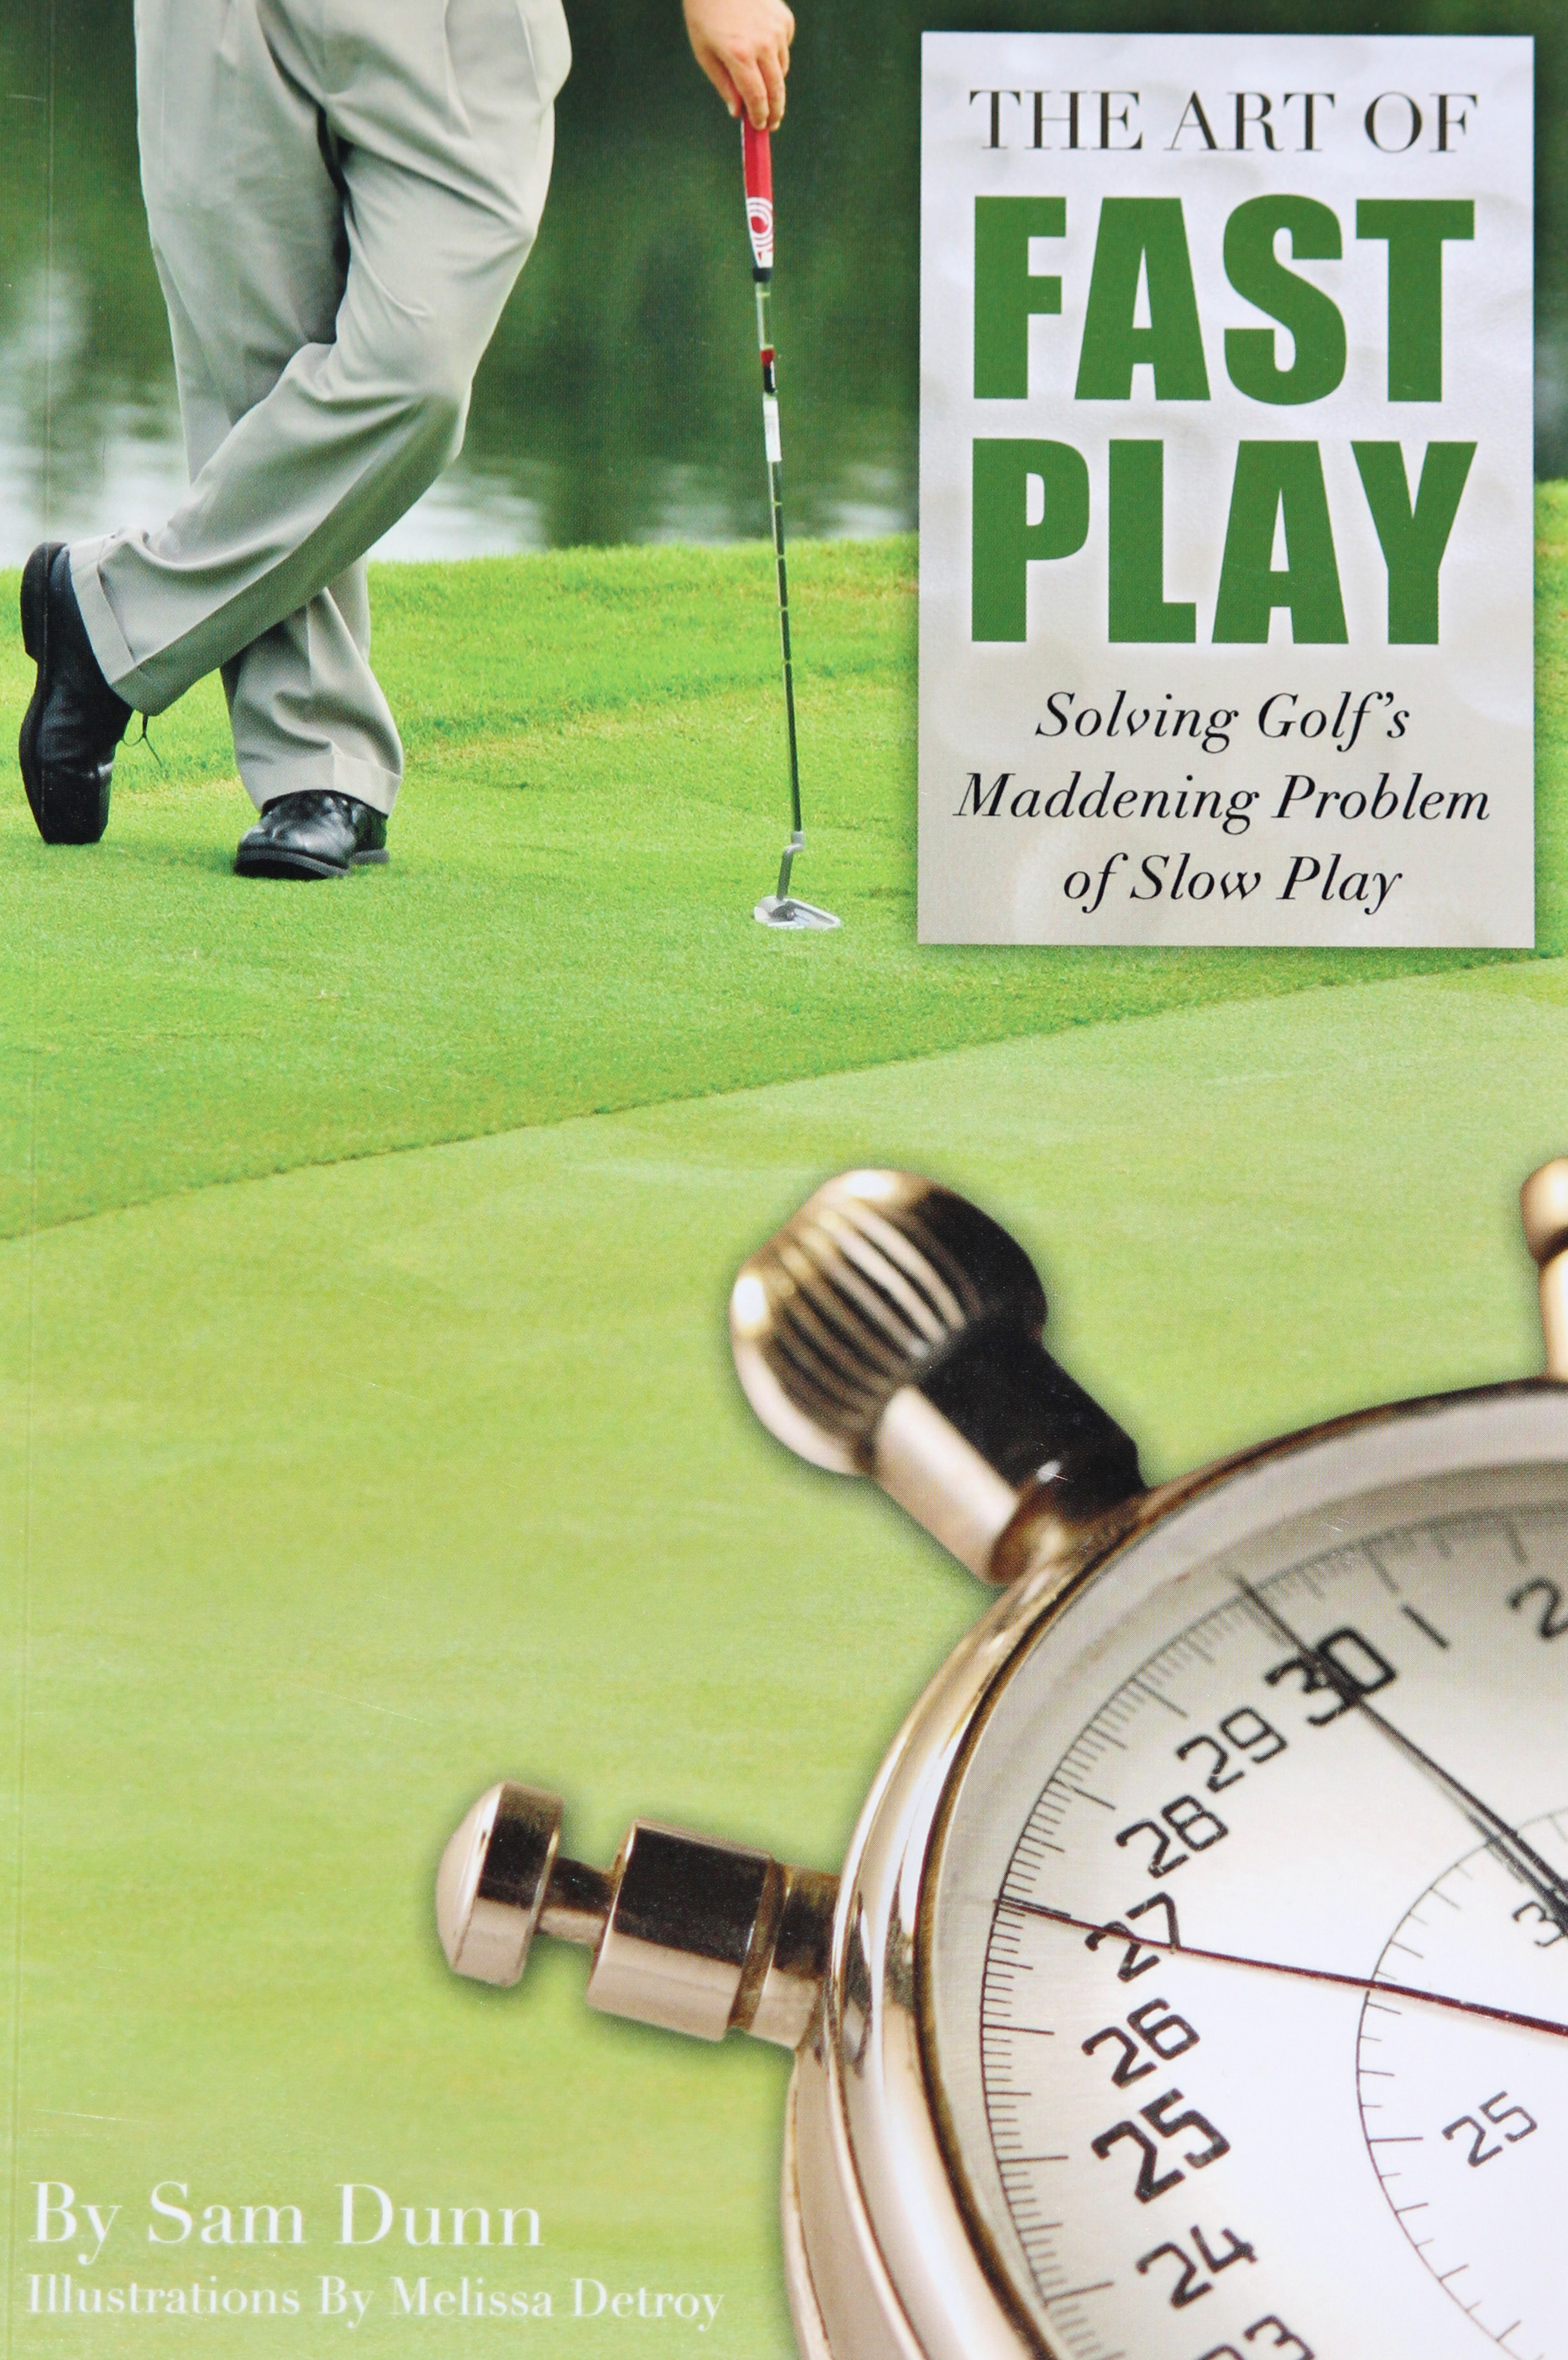 Sam Dunn: The book on pace of play